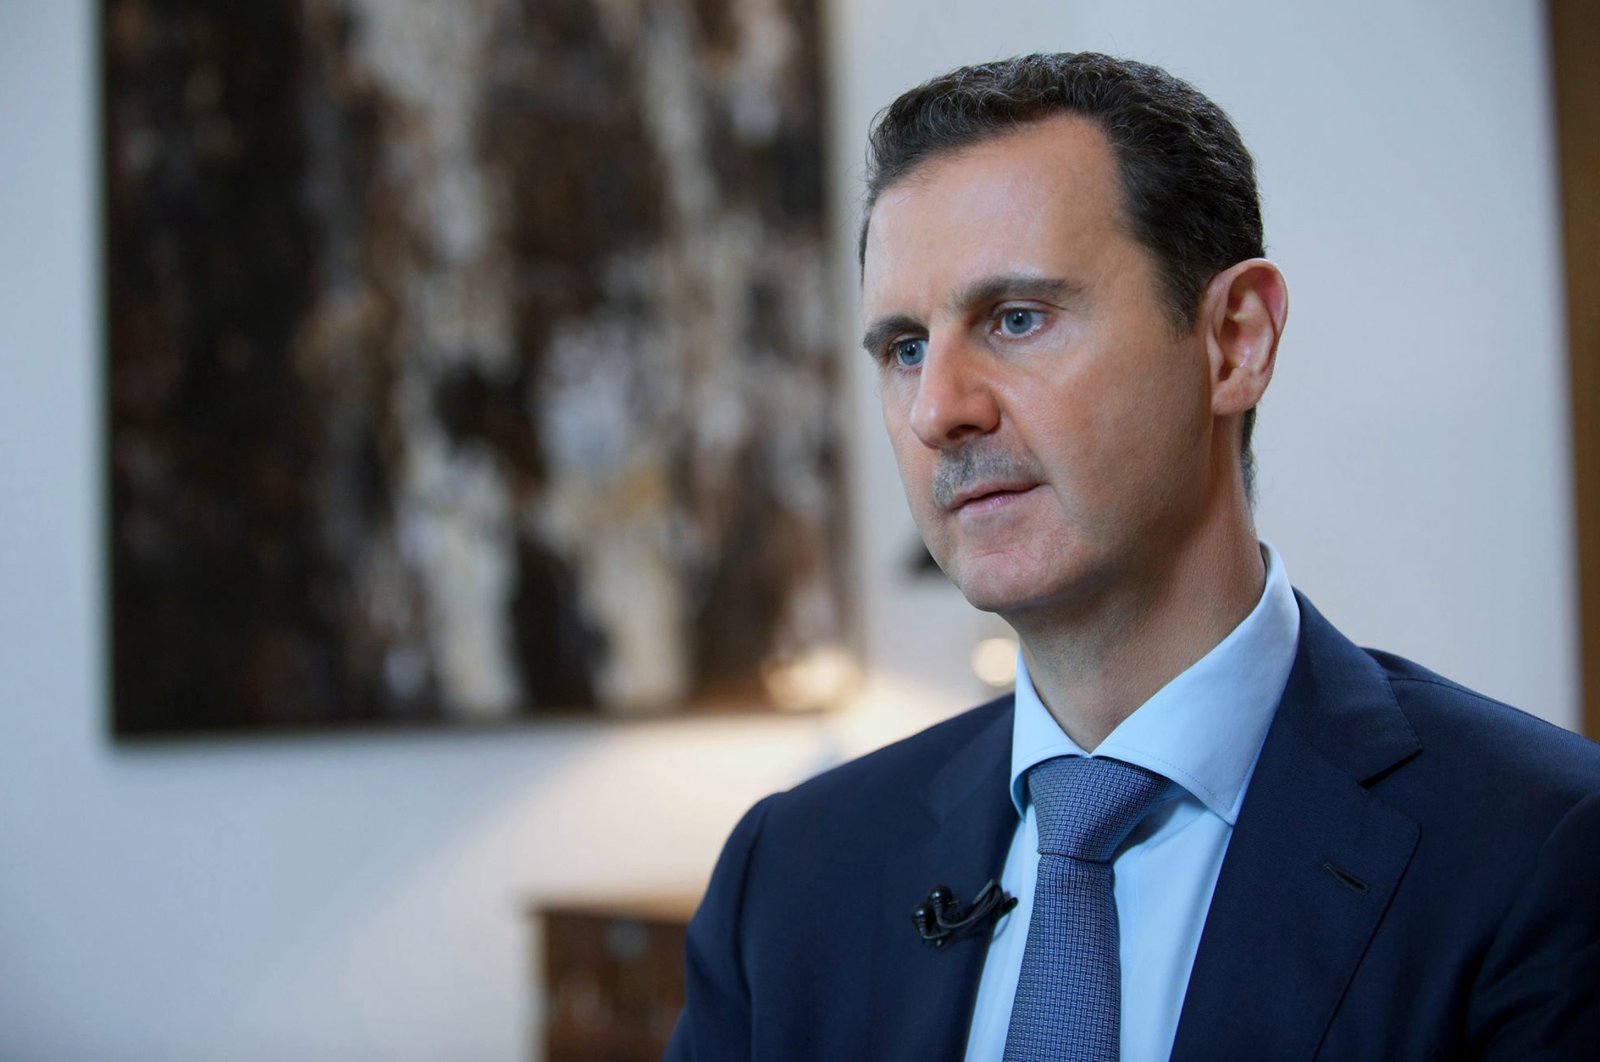 The file photo released by the Syrian official news agency SANA shows Syria's Bashar Assad speaking during an interview with Iran's Khabar TV, in Damascus, Syria, Oct. 4, 2015. (AP Photo)